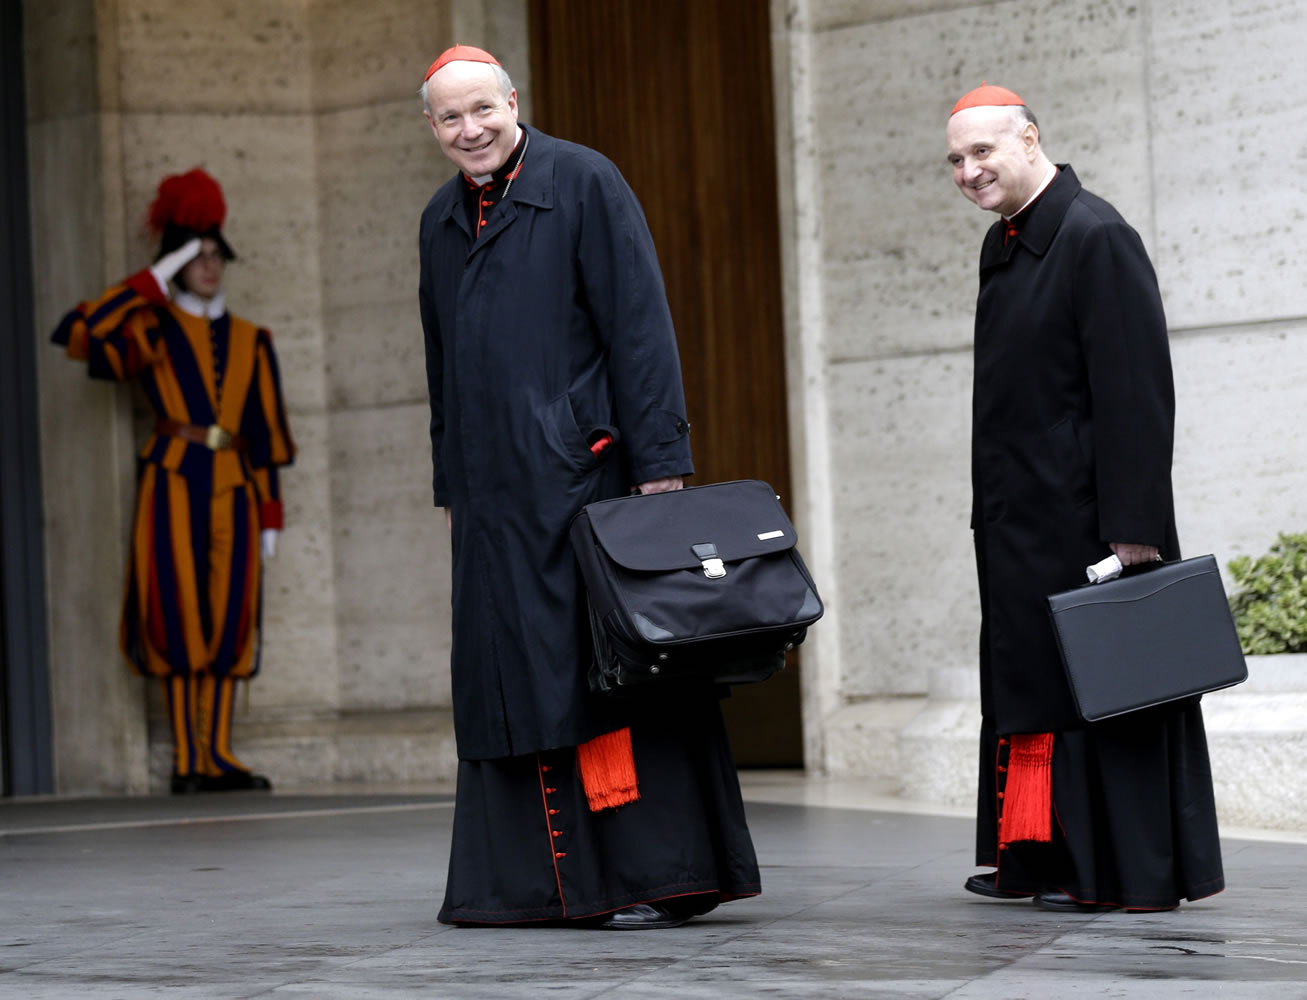 Cardinal Christoph Schoenborn, center, and Cardinal Angelo Comastri  arrive for an afternoon meeting, at the Vatican, Friday, March 8, 2013. The Vatican says the conclave to elect a new pope will likely start in the first few days of next week. The Rev. Federico Lombardi told reporters that cardinals will vote Friday afternoon on the start date of the conclave but said it was &quot;likely&quot; they would choose Monday, Tuesday or Wednesday. The cardinals have been attending pre-conclave meetings to discuss the problems of the church and decide who among them is best suited to fix them as pope.